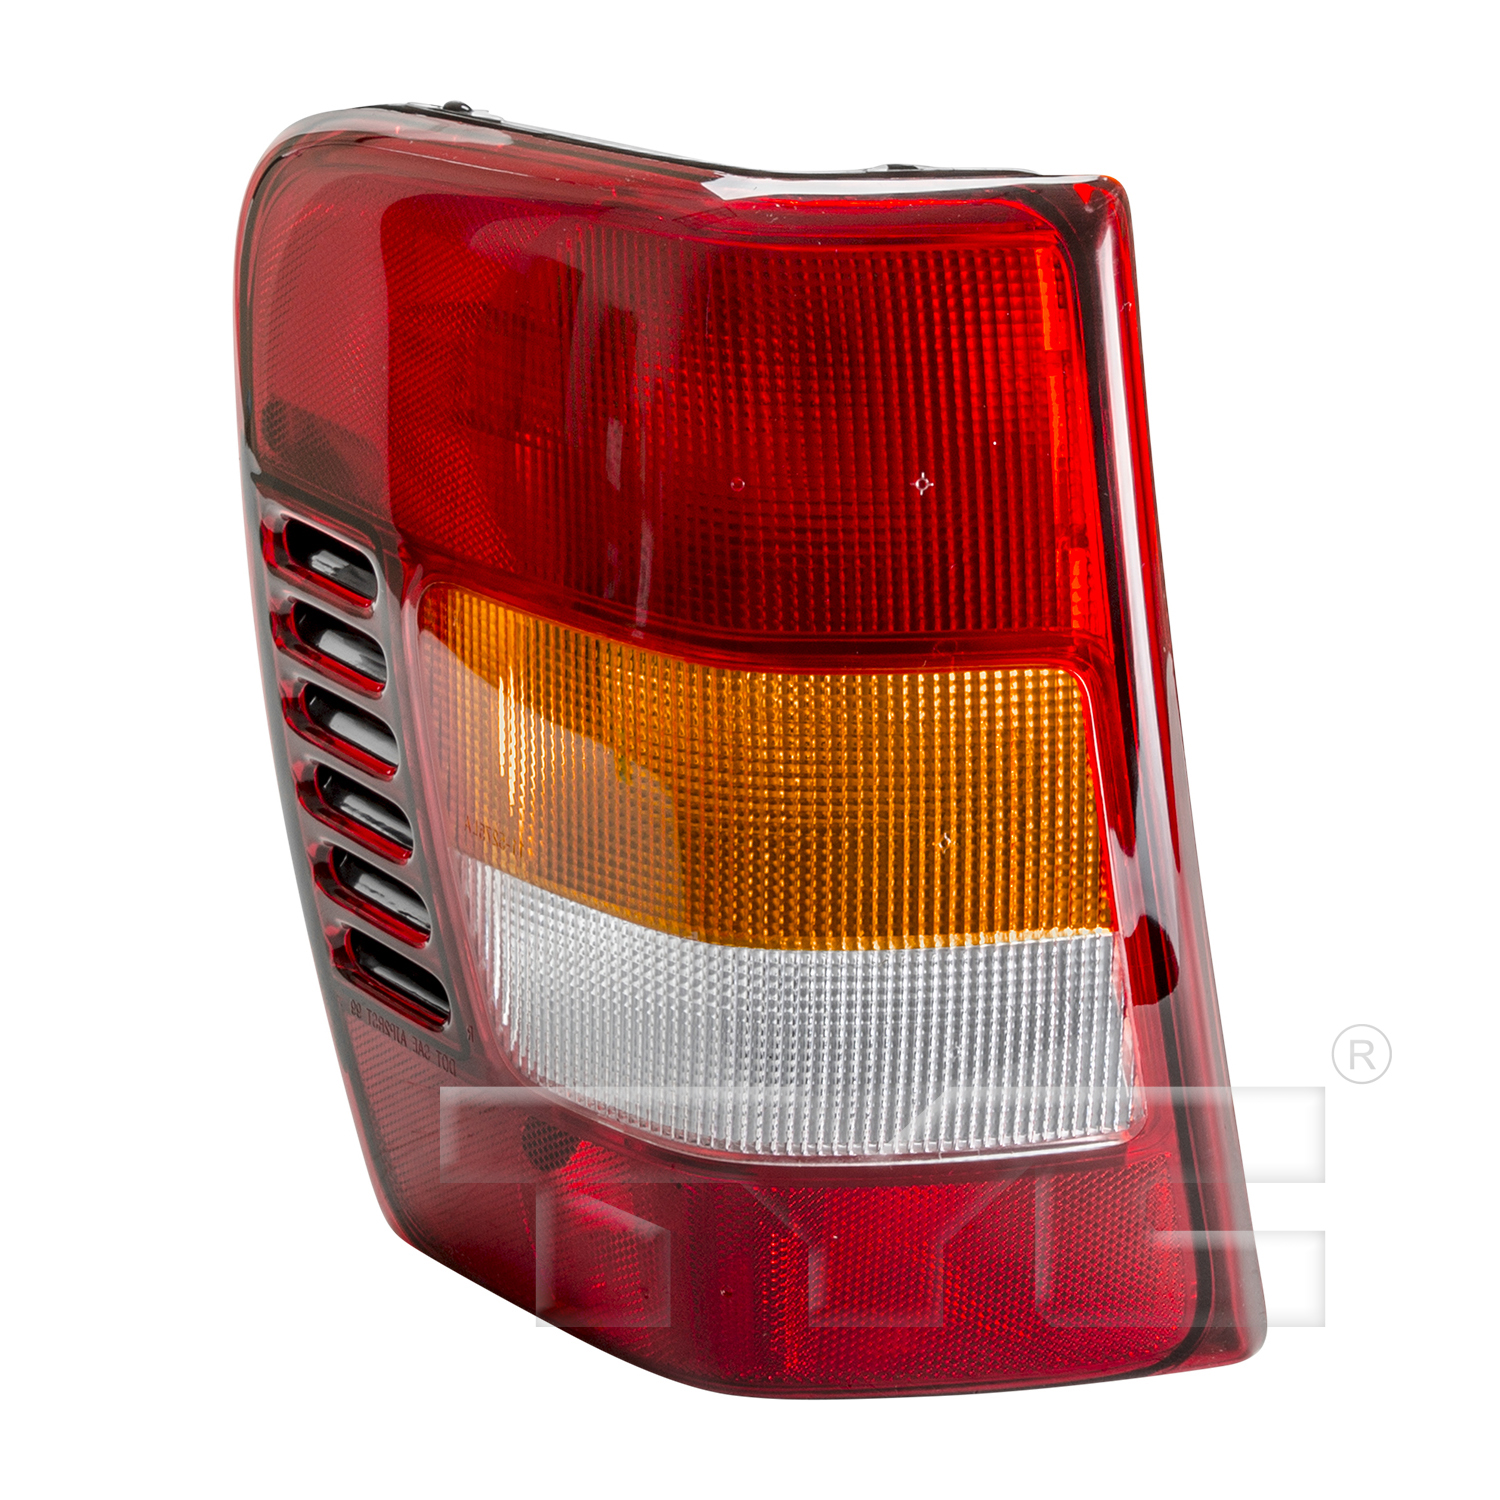 Aftermarket TAILLIGHTS for JEEP - GRAND CHEROKEE, GRAND CHEROKEE,02-04,LT Taillamp assy